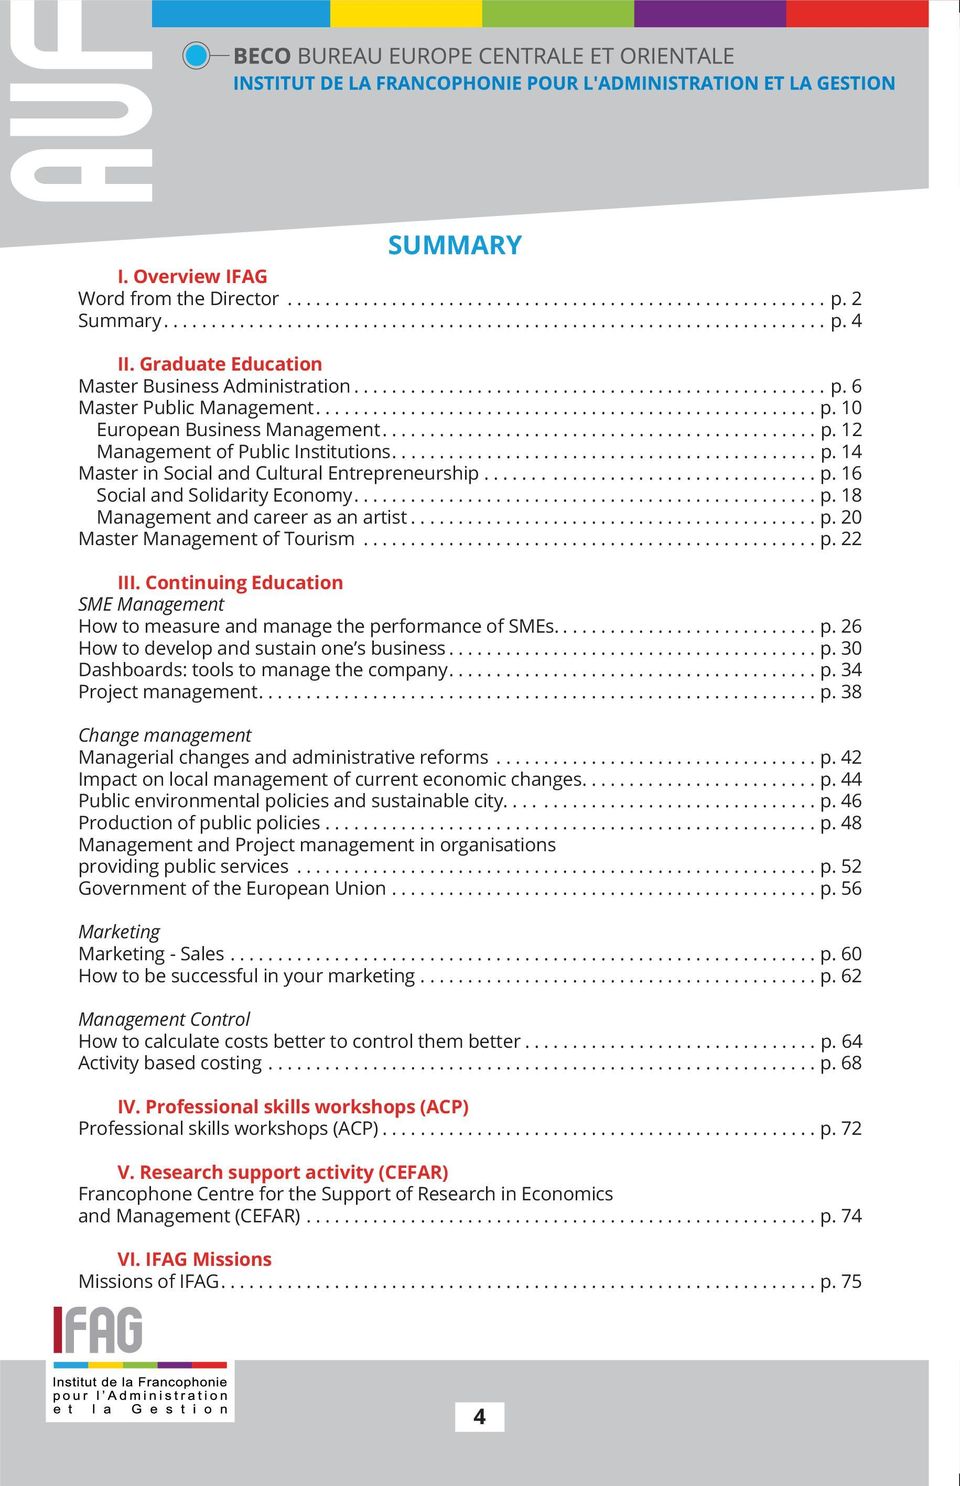 ............................................. p. 12 Management of Public Institutions............................................. p. 14 Master in Social and Cultural Entrepreneurship................................... p. 16 Social and Solidarity Economy.